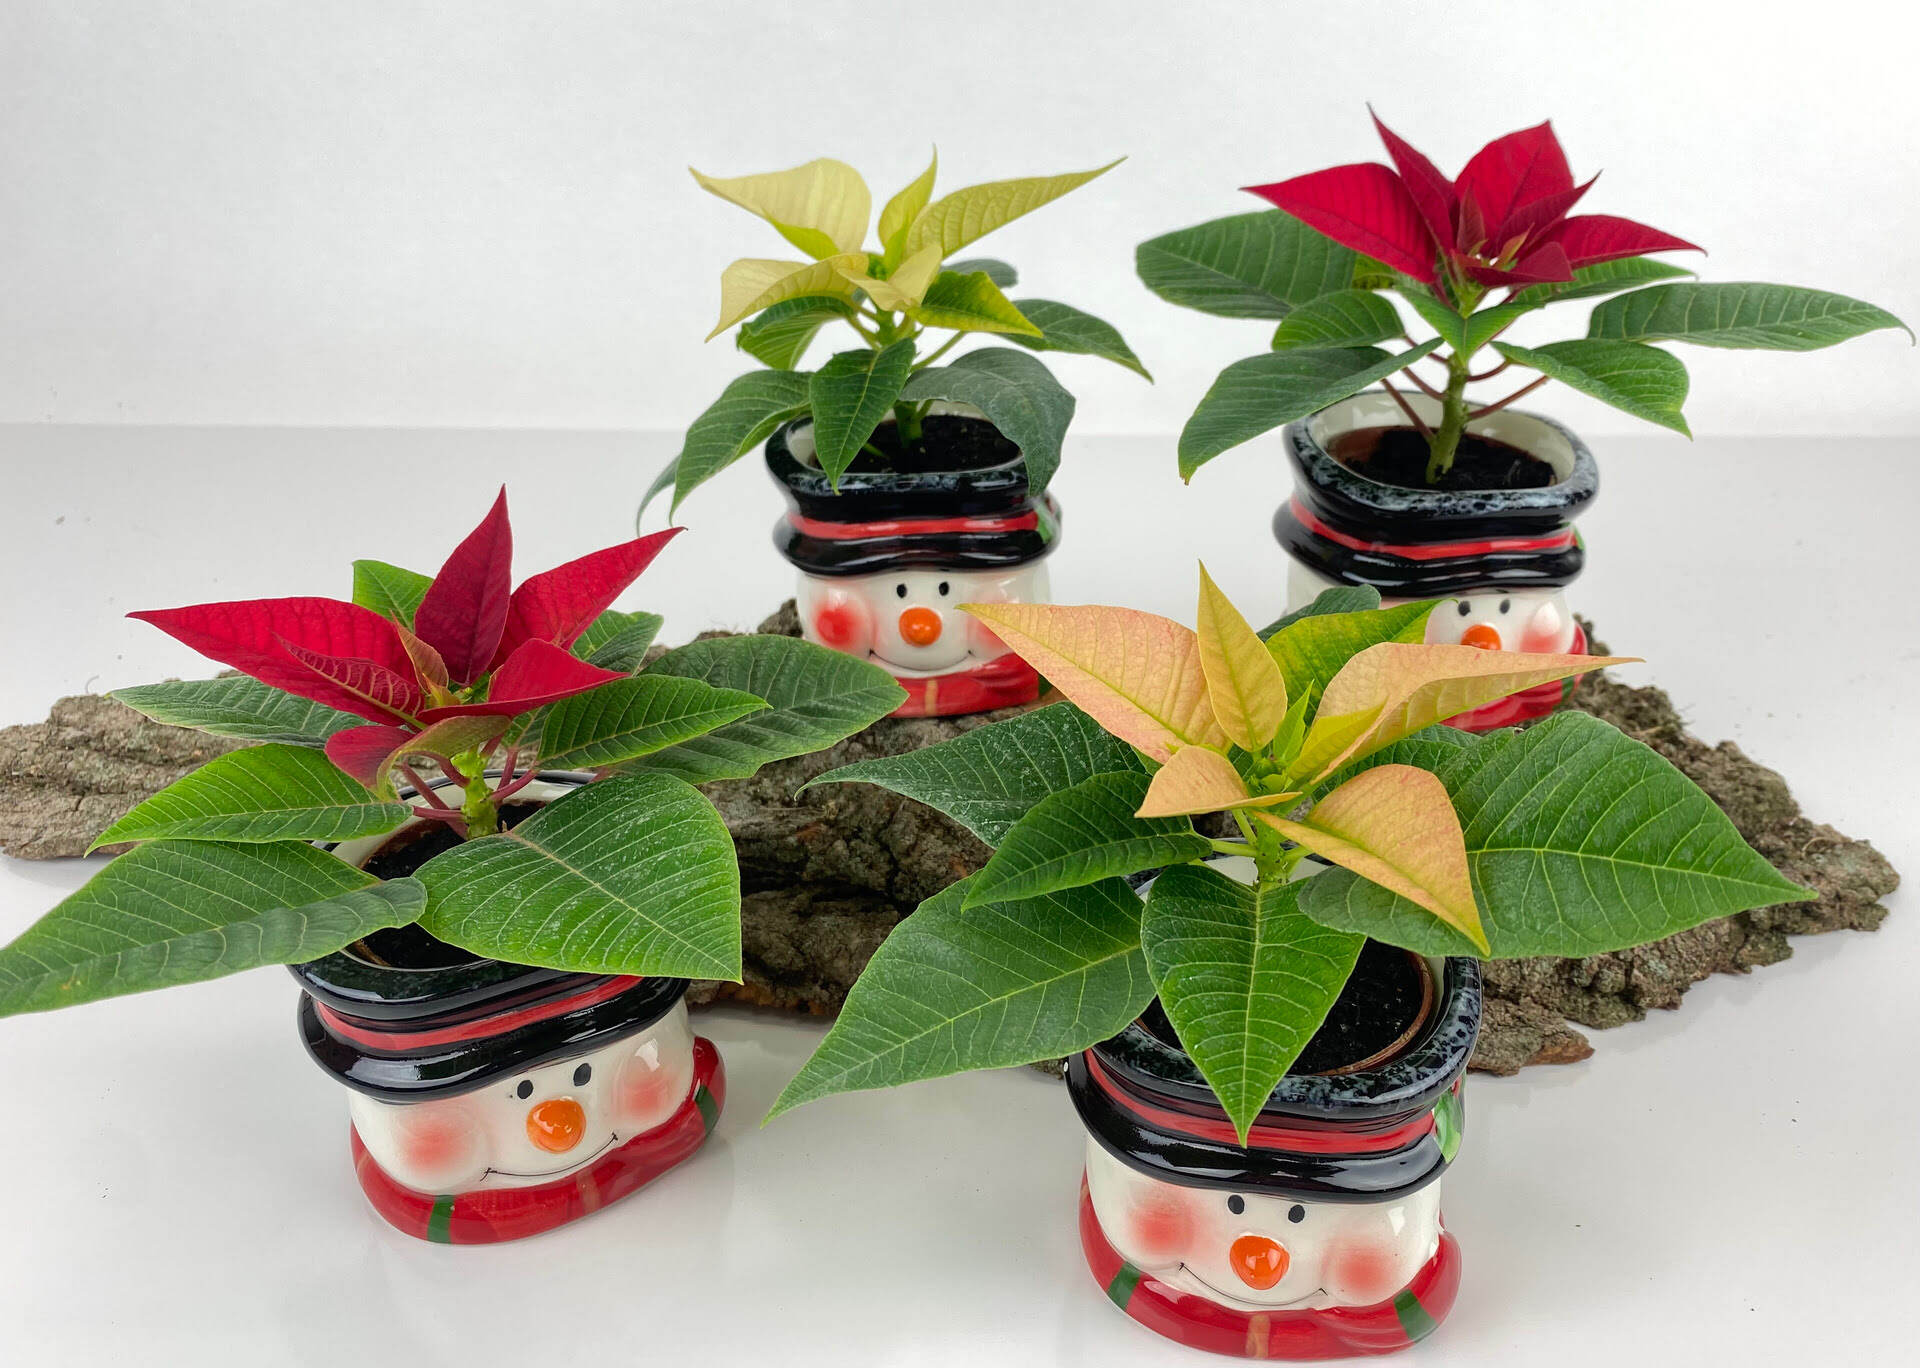 How To Grow Poinsettias From Seed